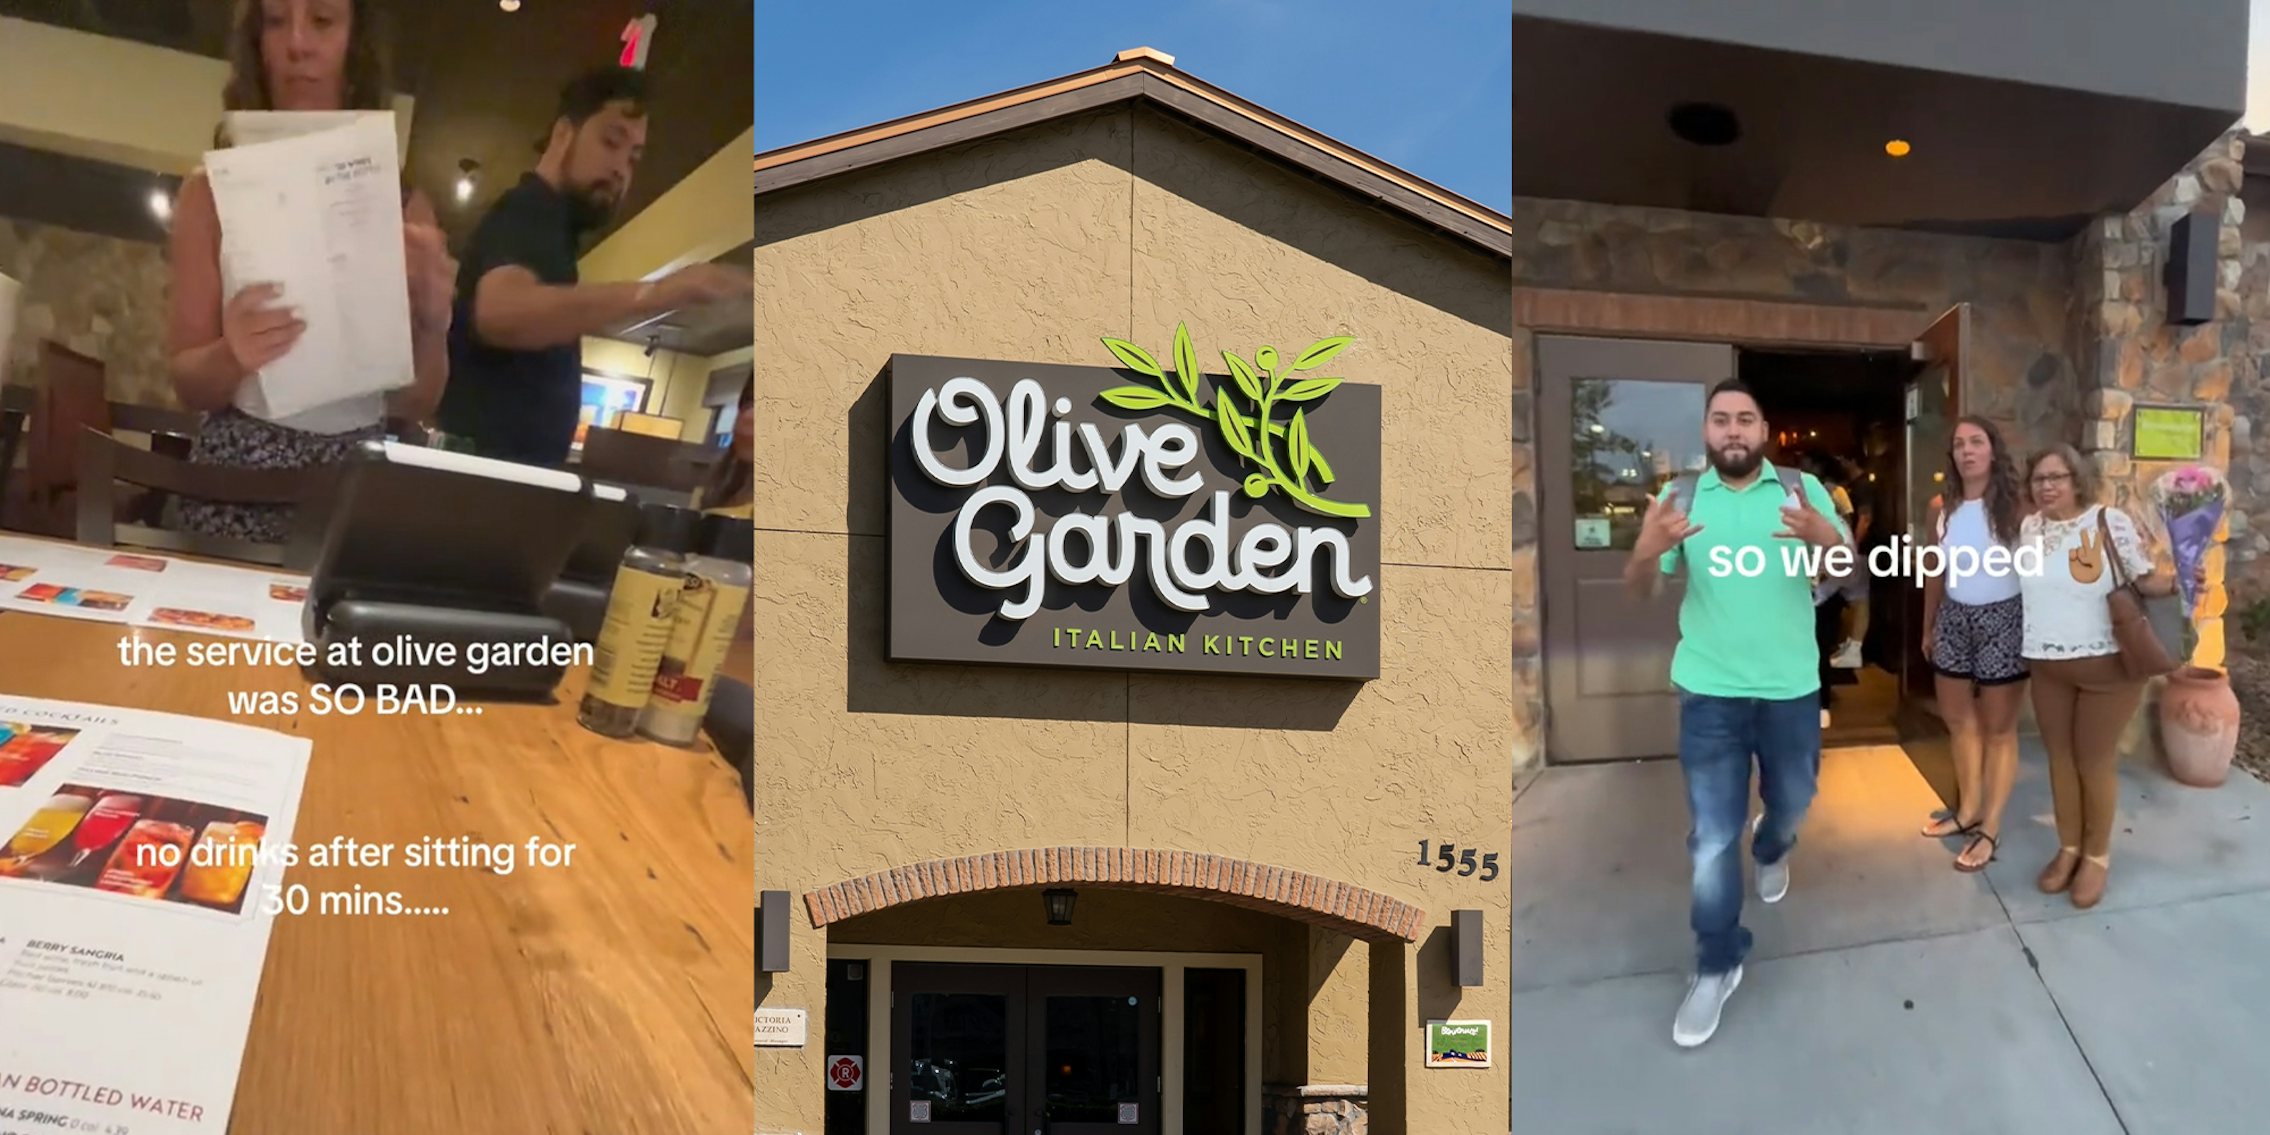 Olive Garden customers walk out on table after service is ‘bad’